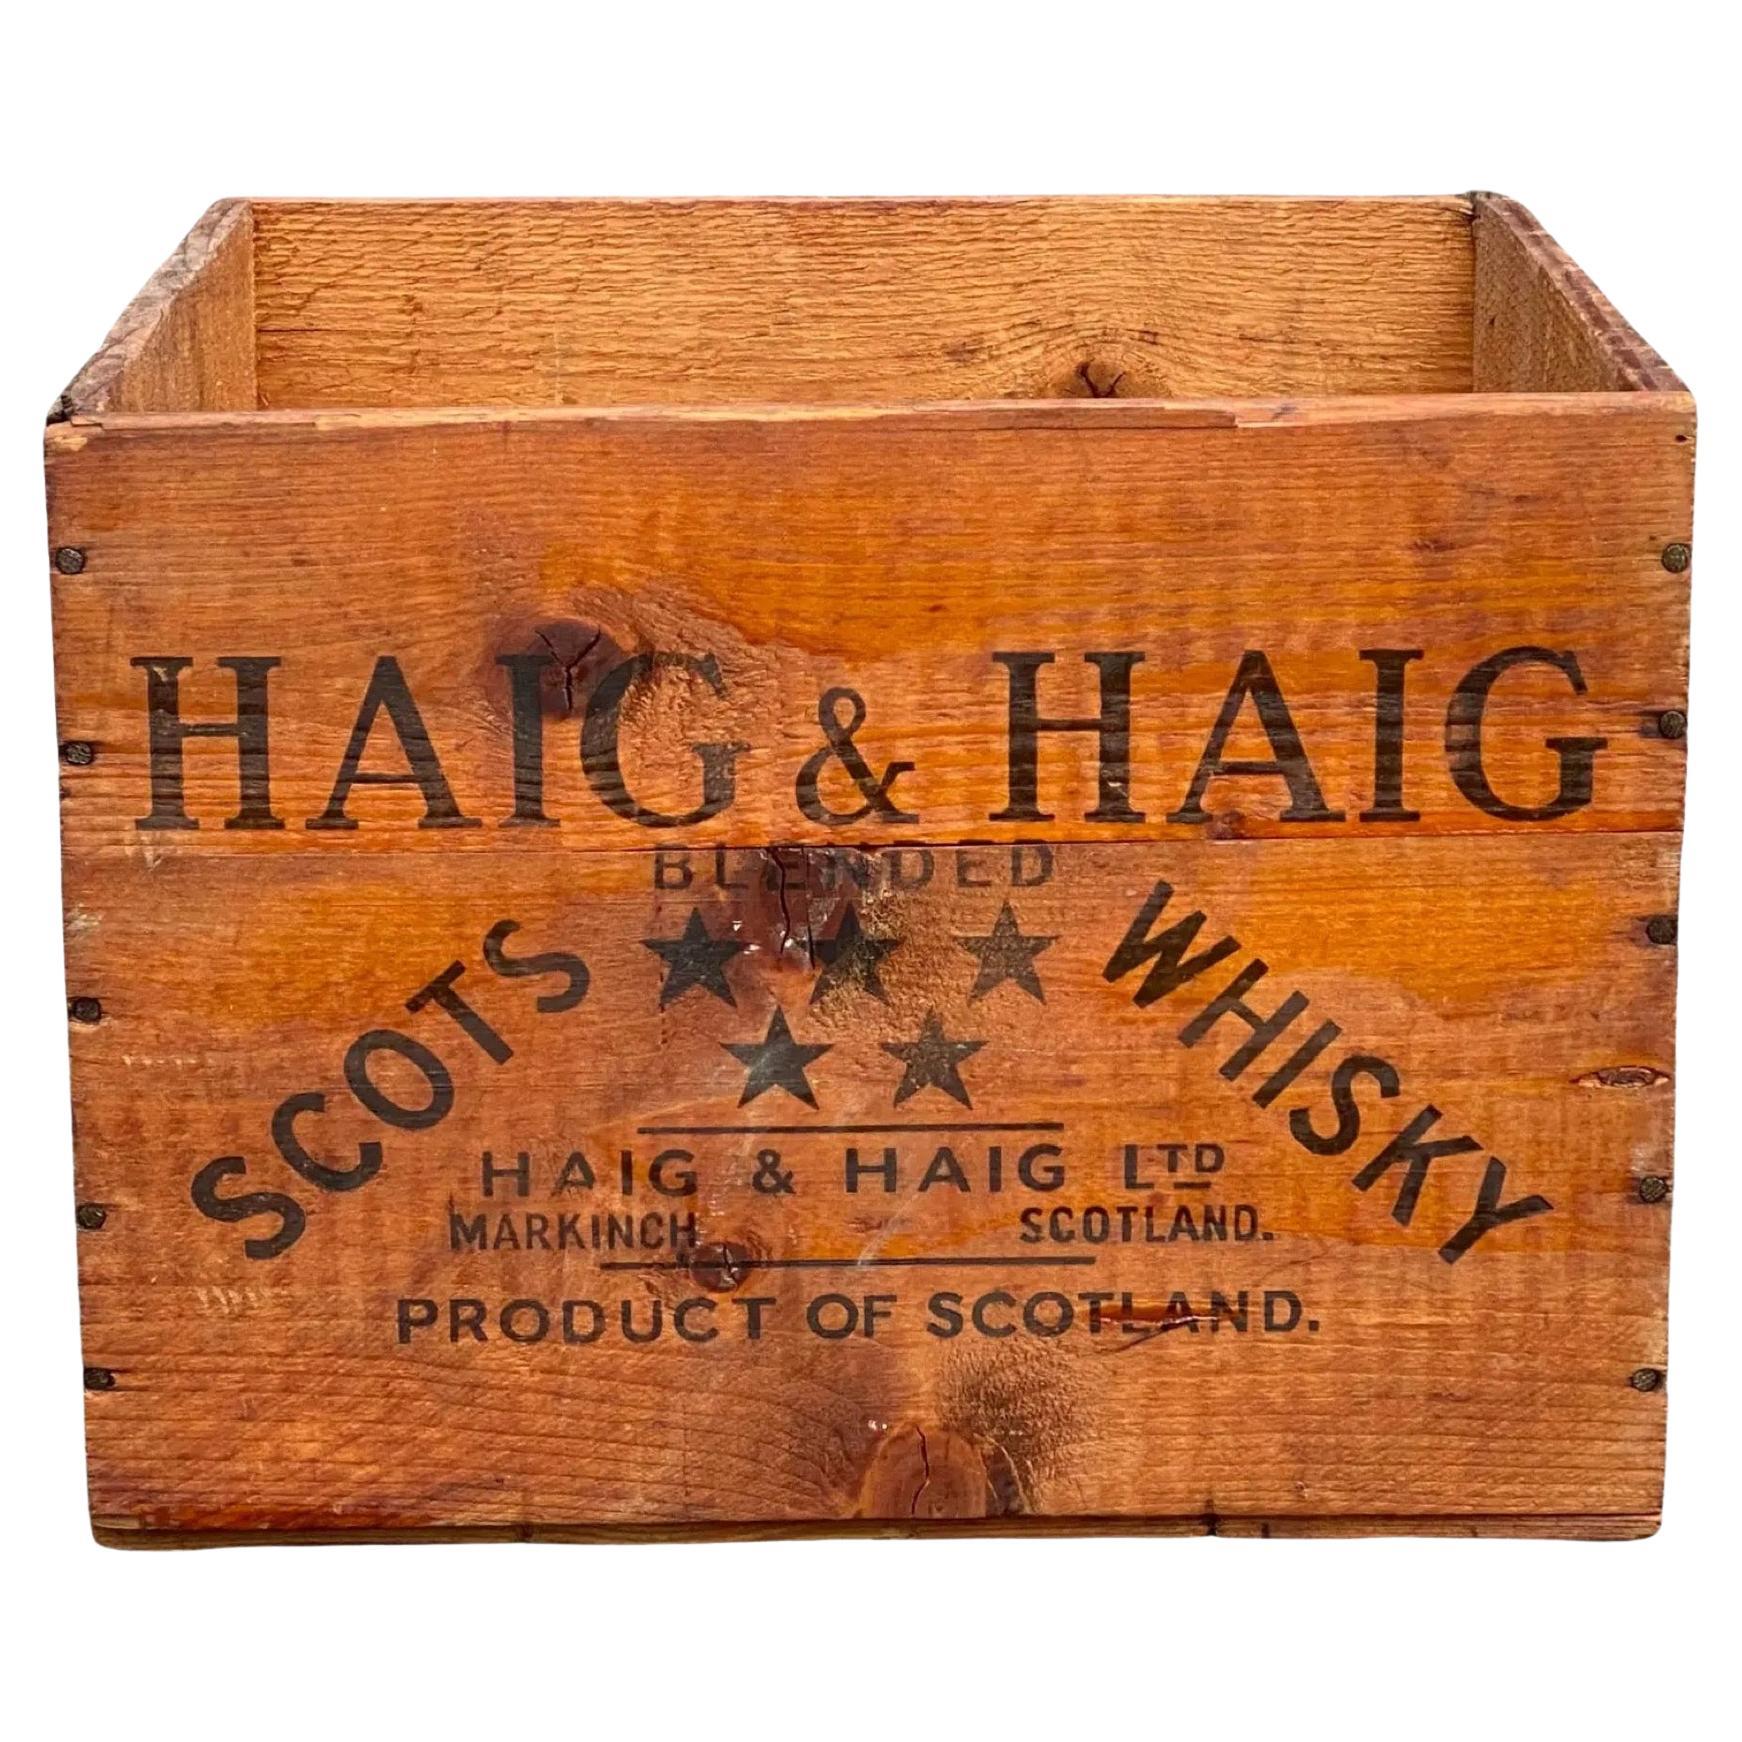 1950's White Horse Cellar Scotch Wooden Whisky Crate